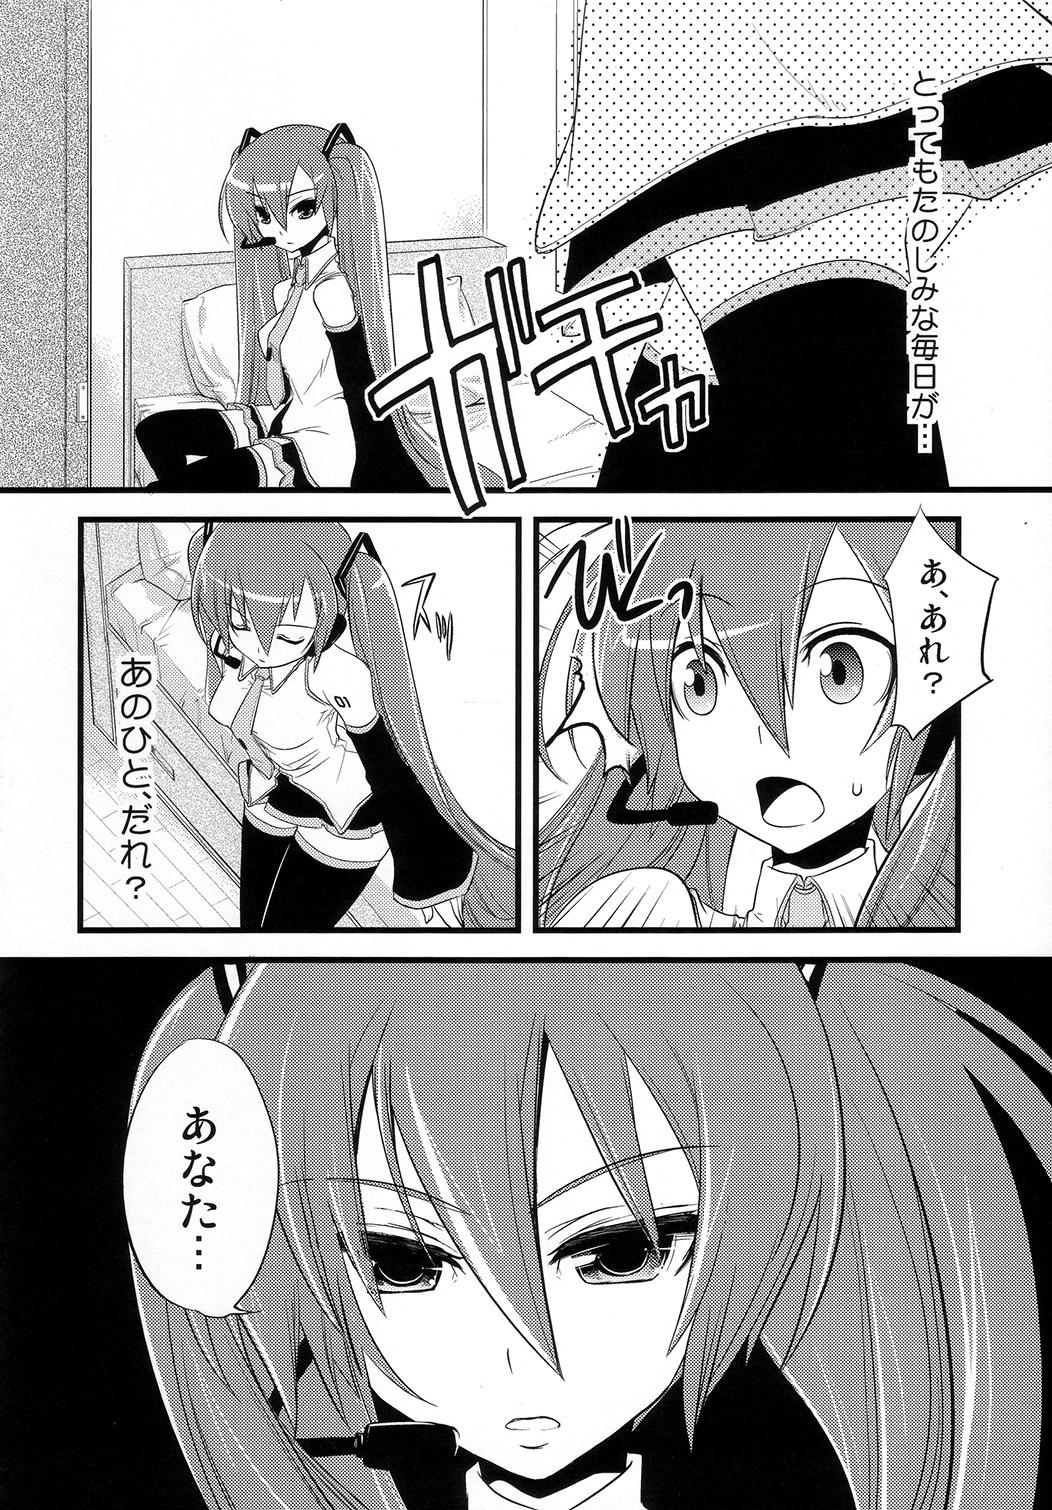 Pigtails Install/Uninstall - Vocaloid Sexcams - Page 7